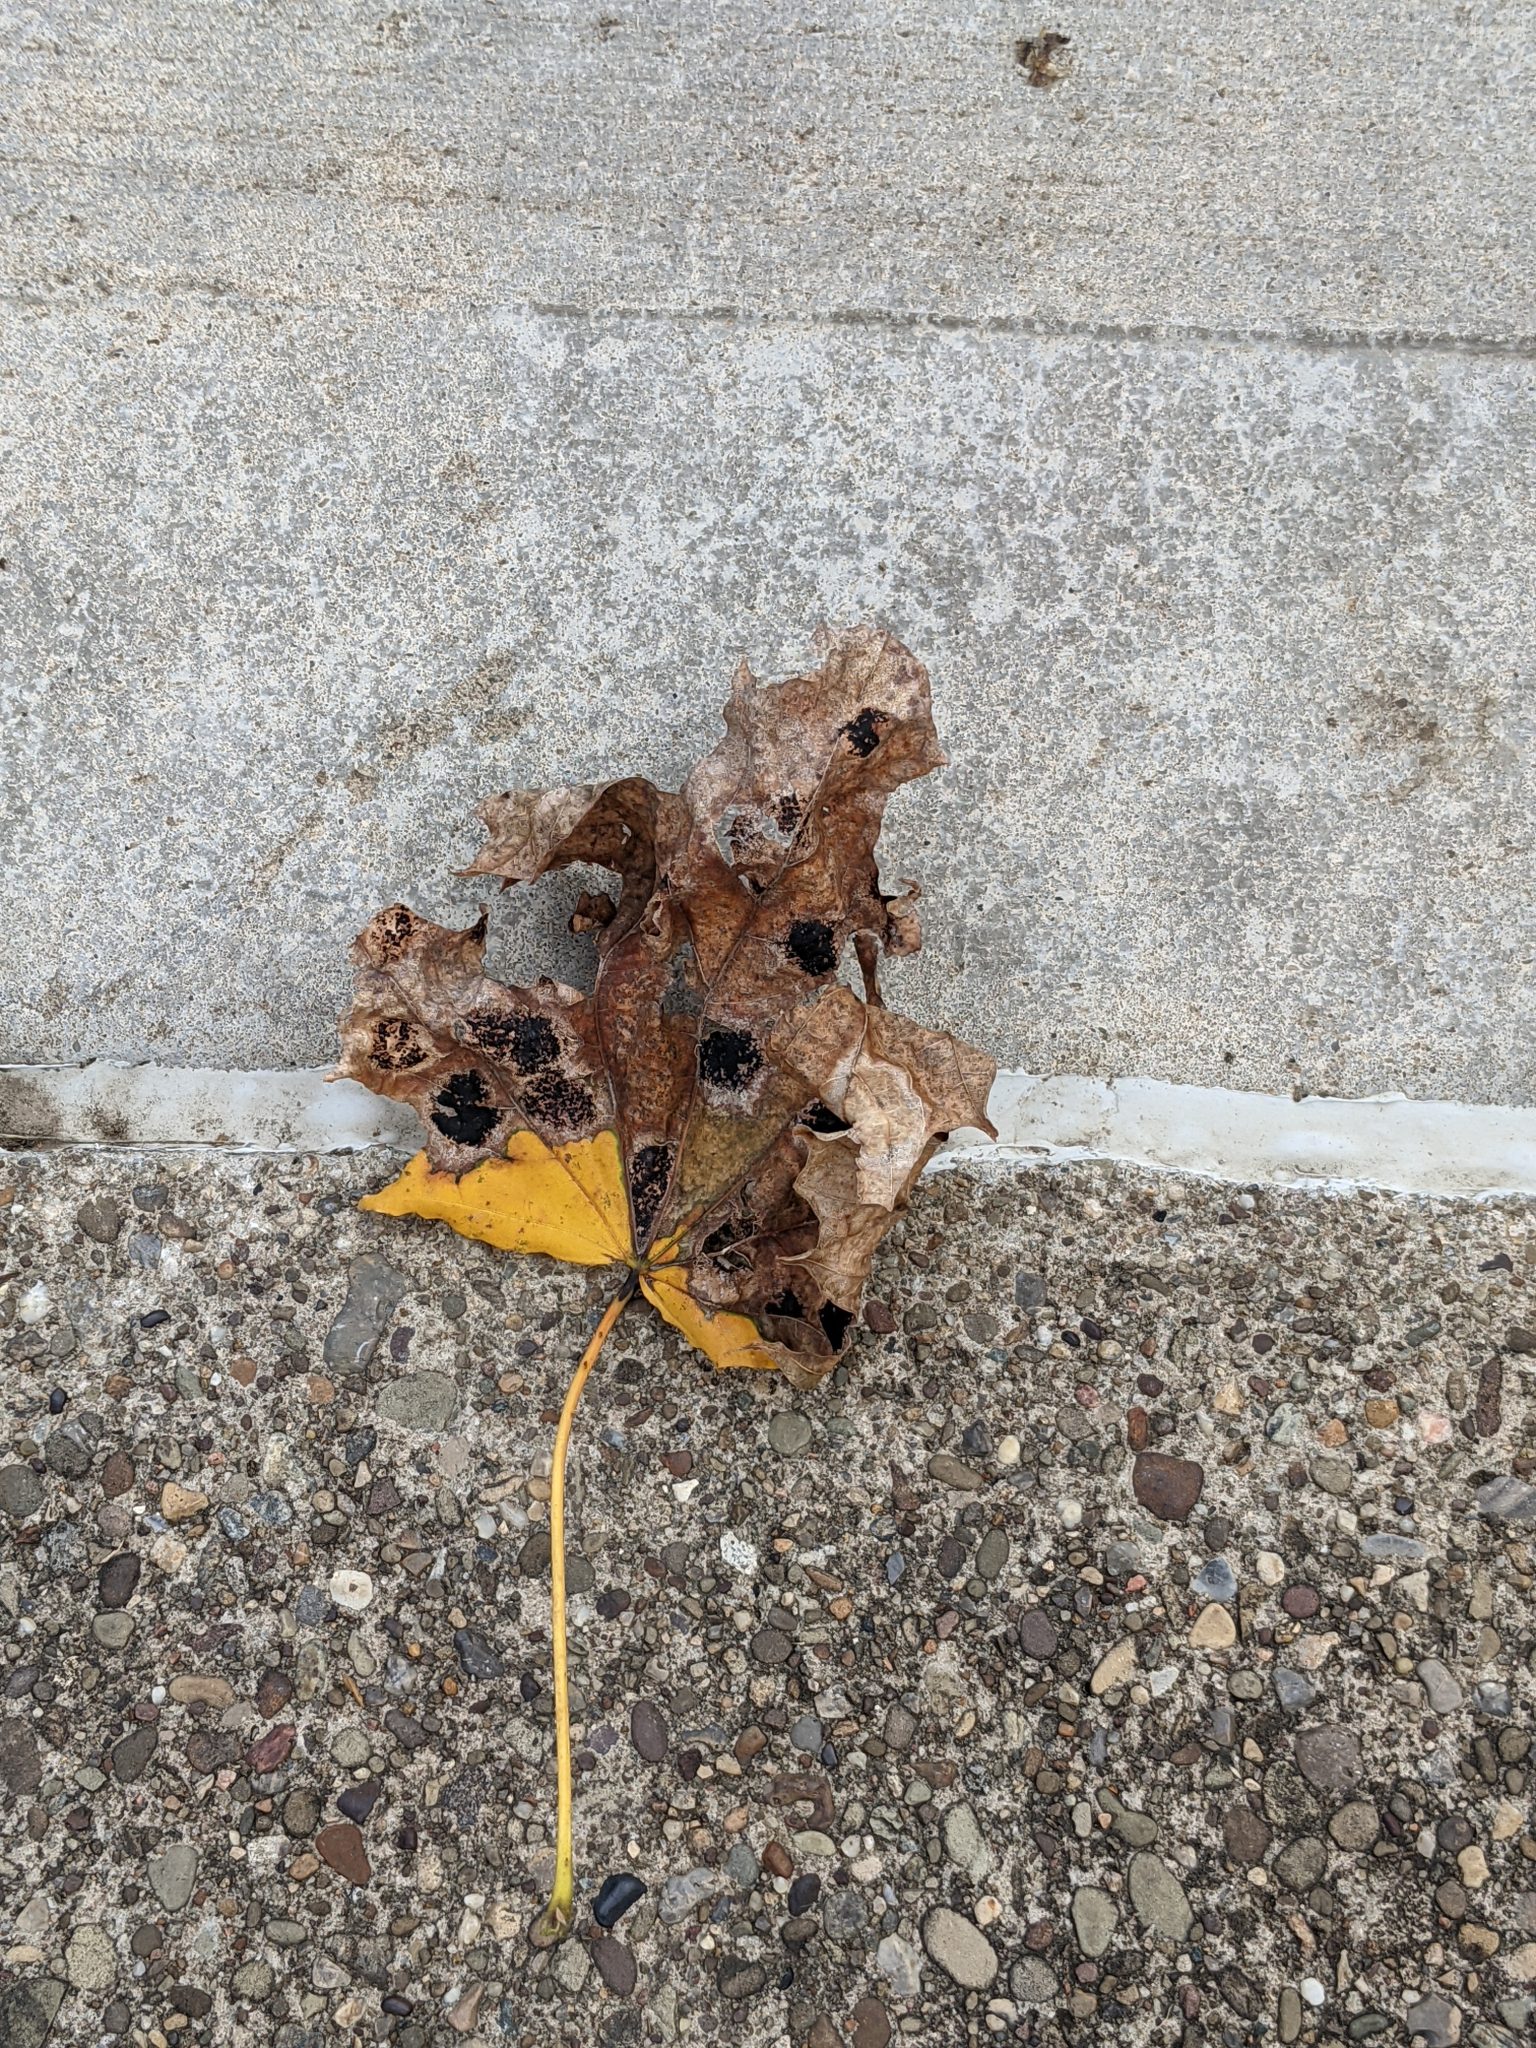 An orange leaf on the ground that is crumbling and trying brown